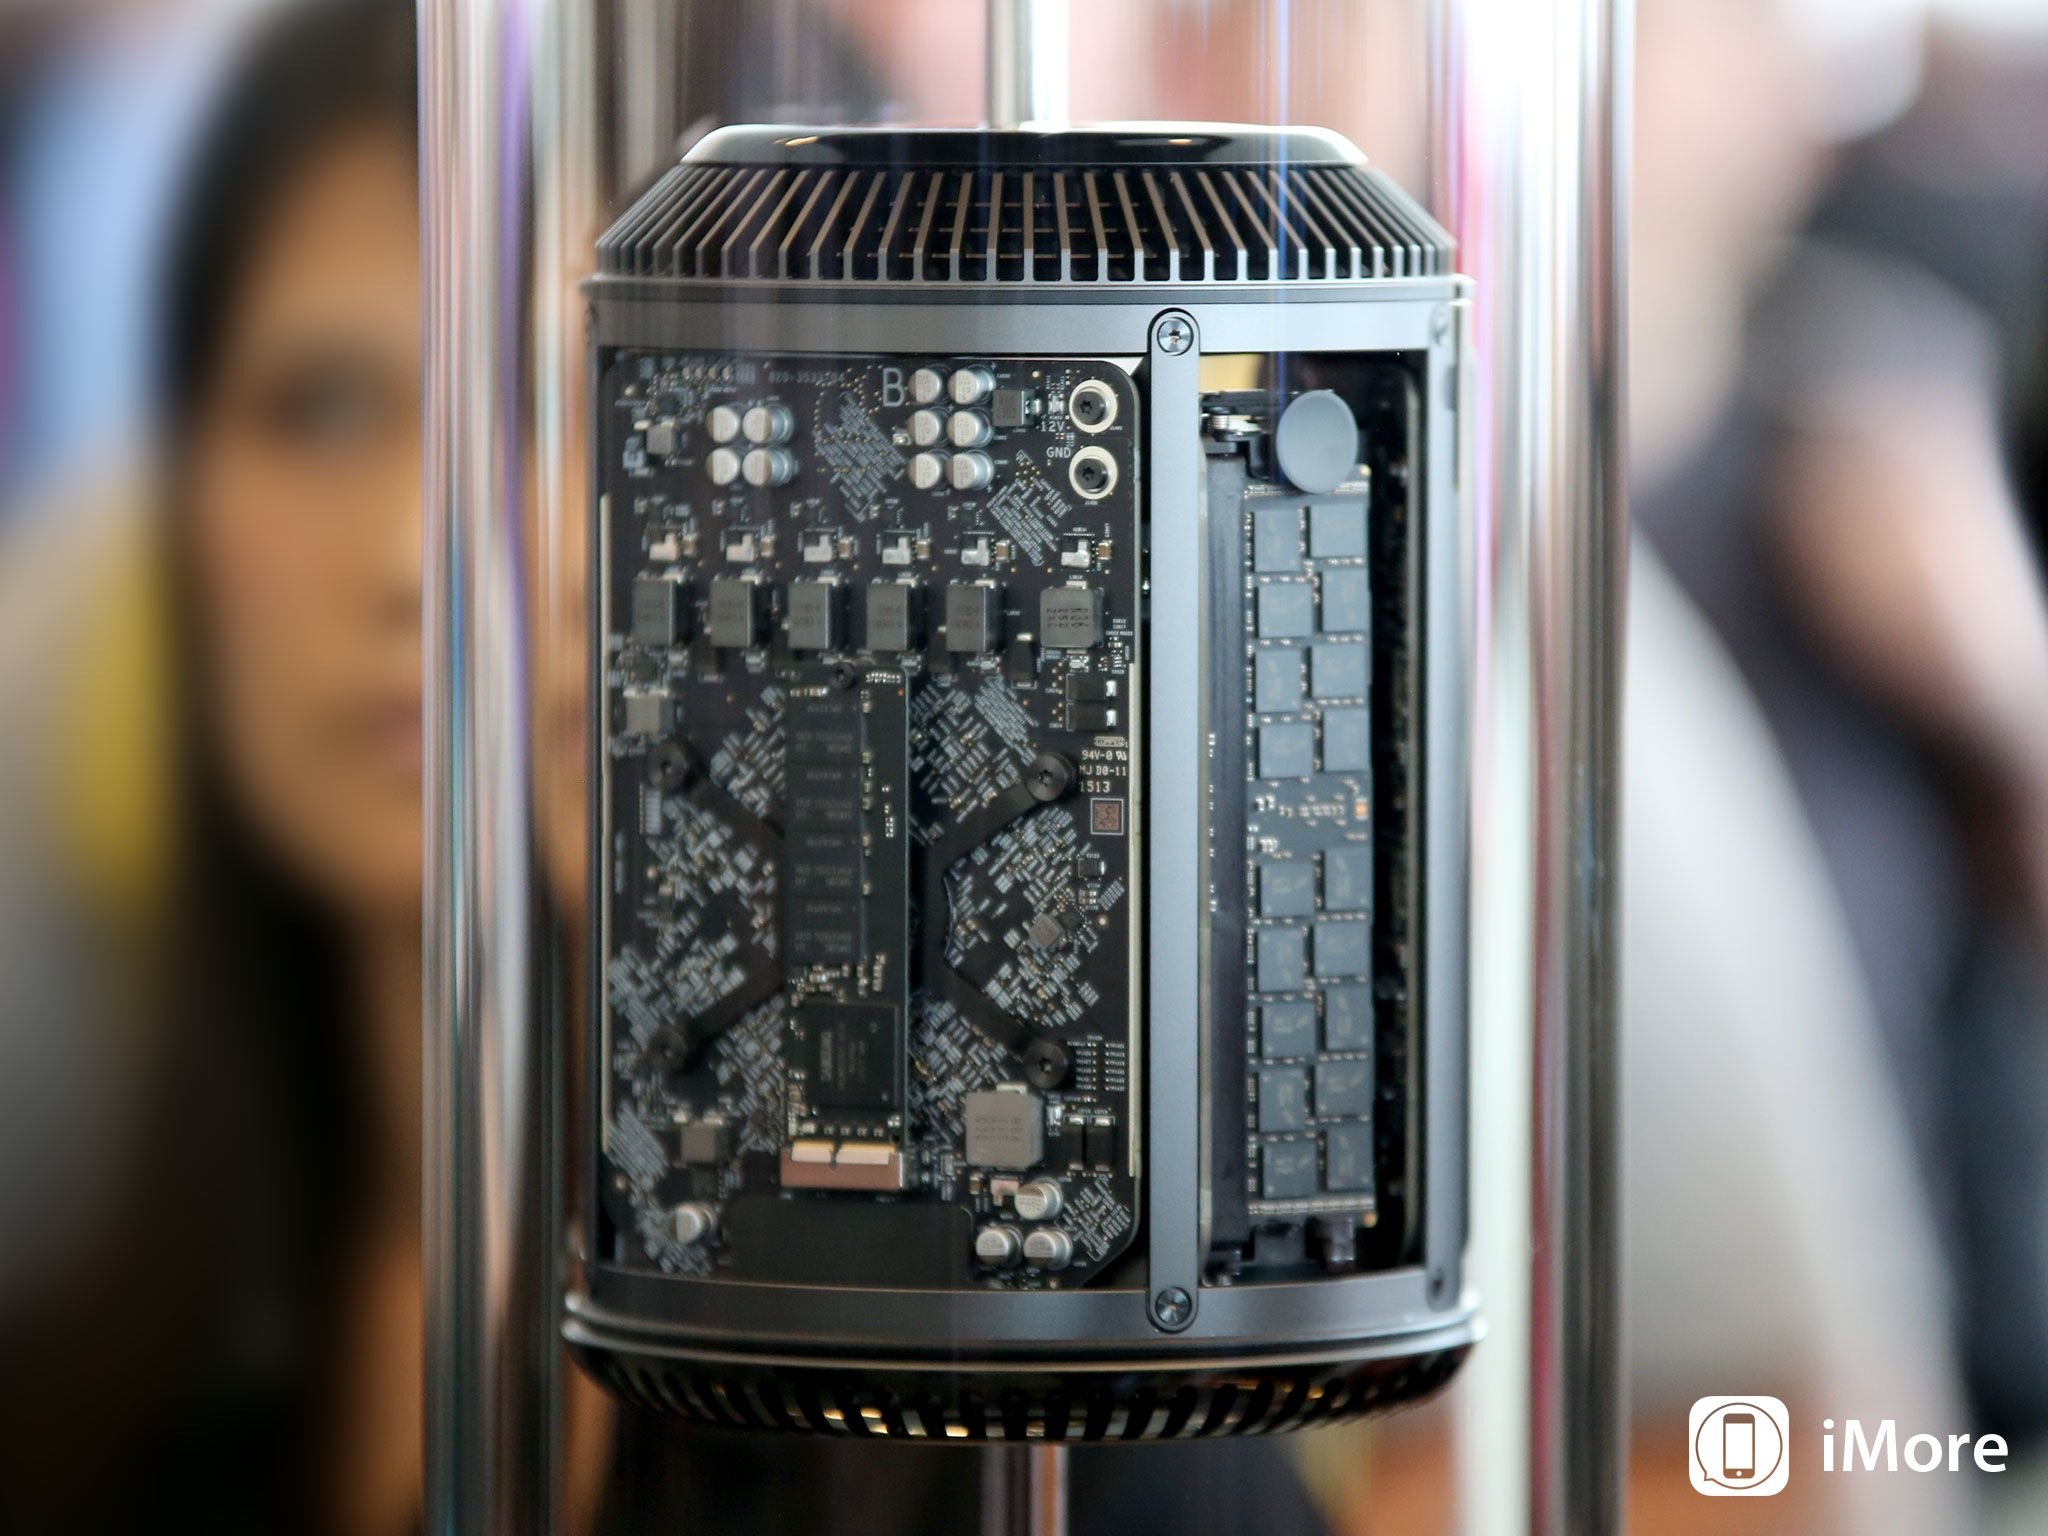 The Mac Pro is an object of tech lust, but do you actually need one?